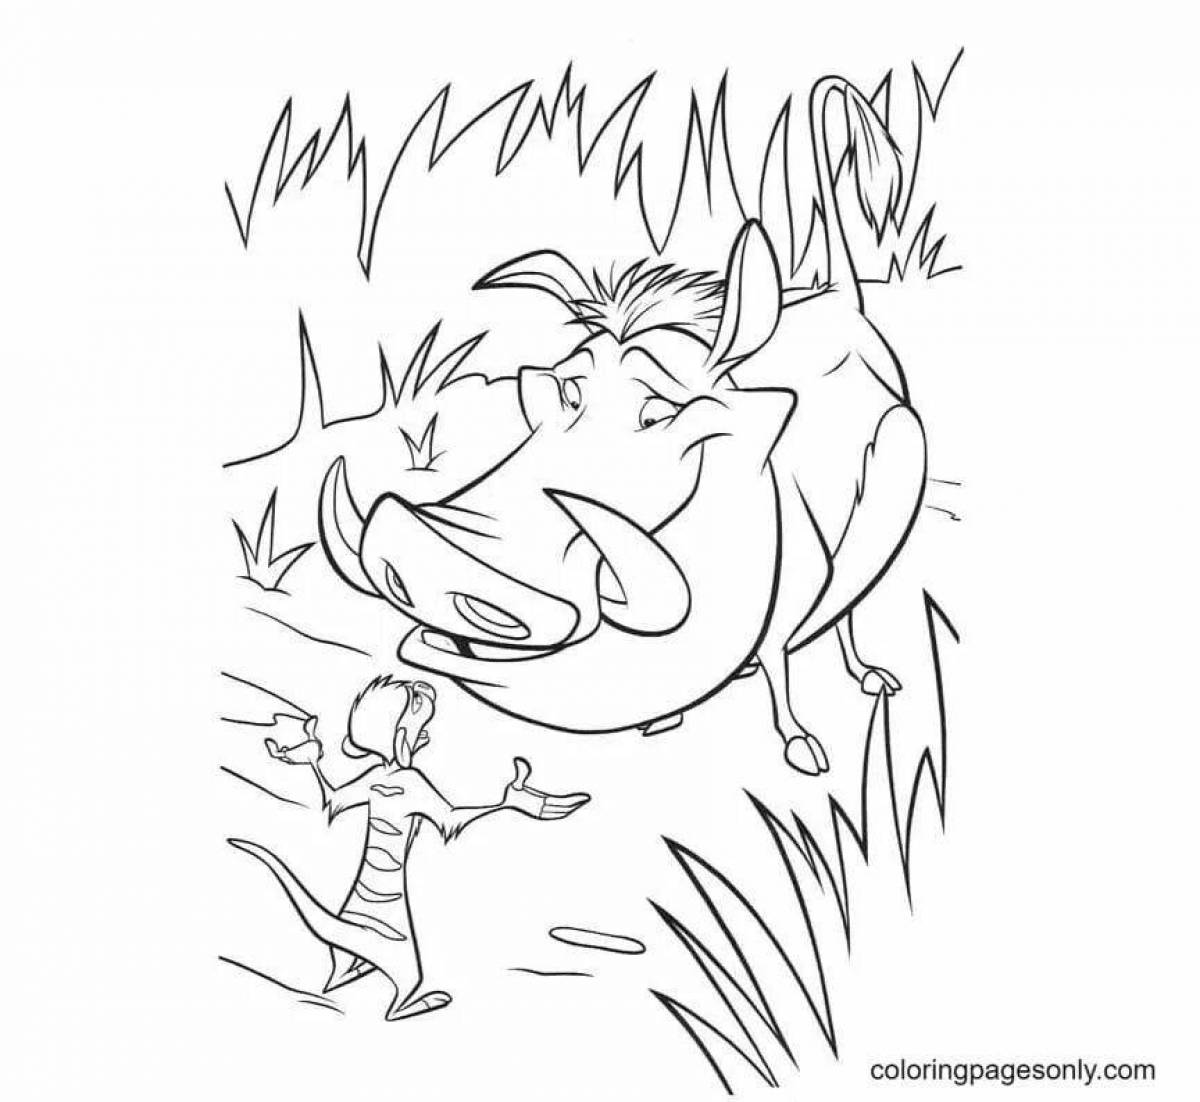 Amazing pumbaa coloring page